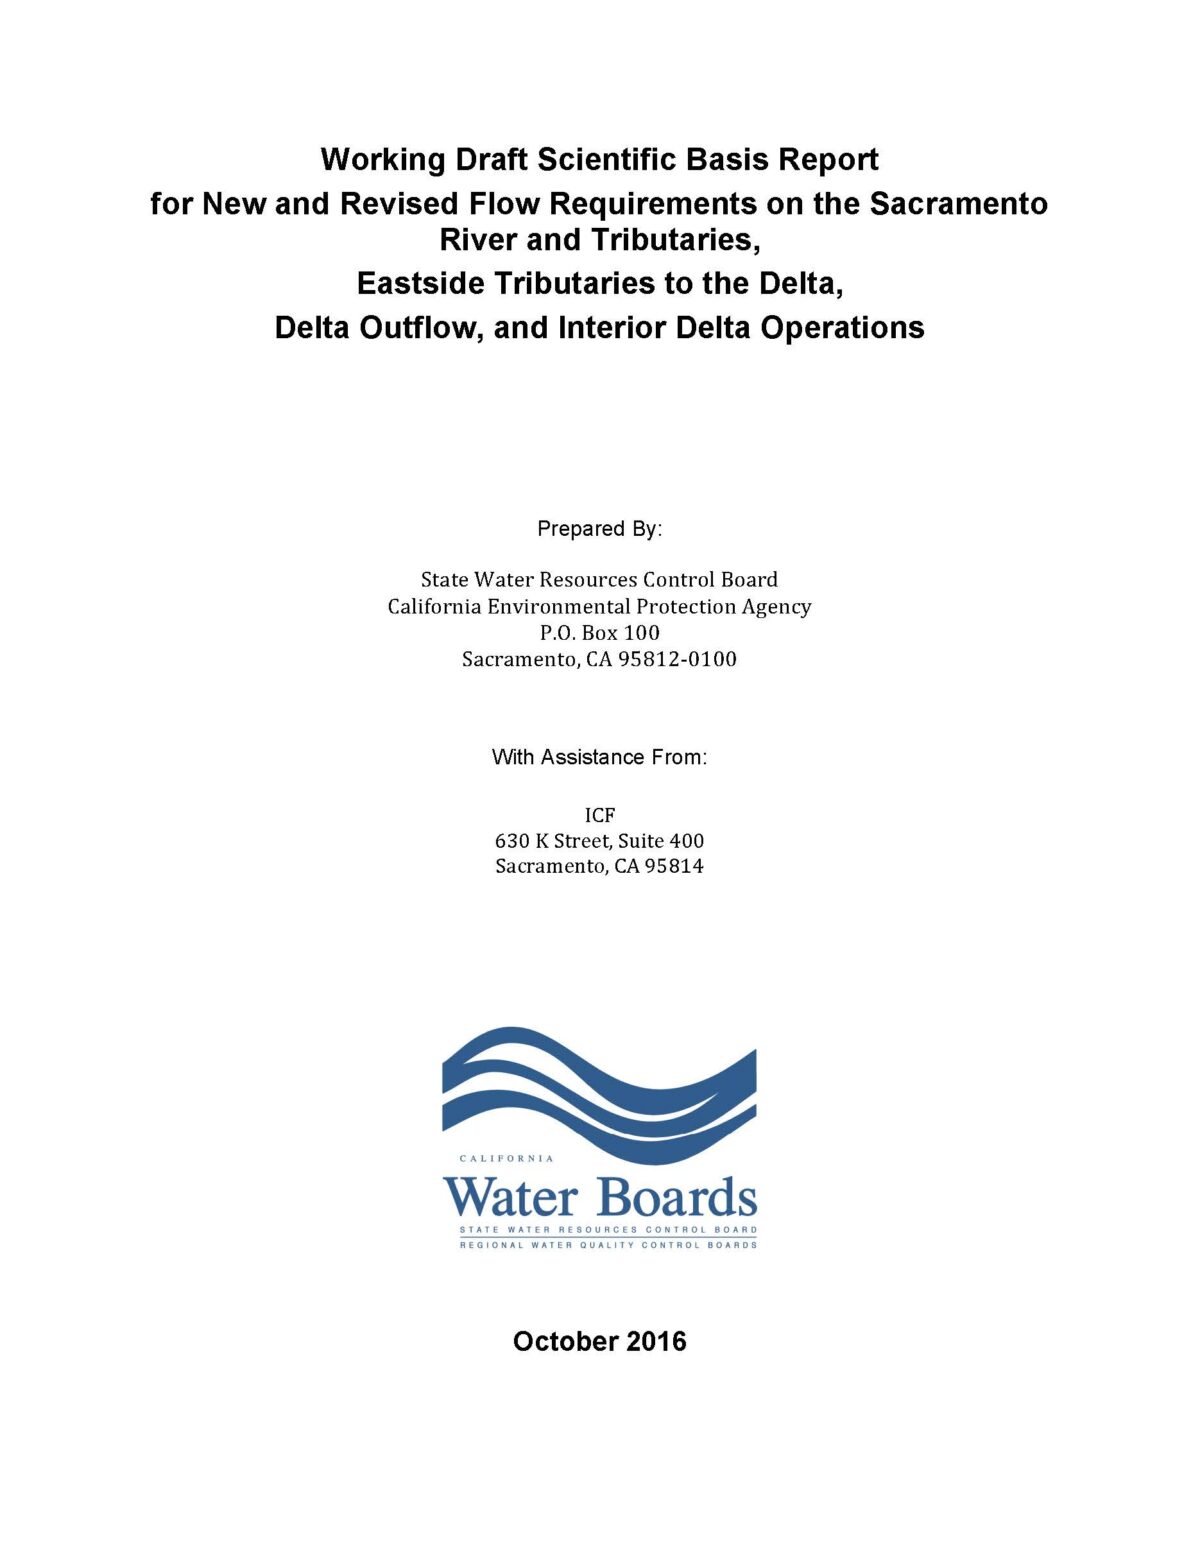 Working Draft Scientific Basis Report for New and Revised Flow Requirements on the Sacramento River and Tributaries, Eastside Tributaries to the Delta, Delta Outflow, and Interior Delta Operations